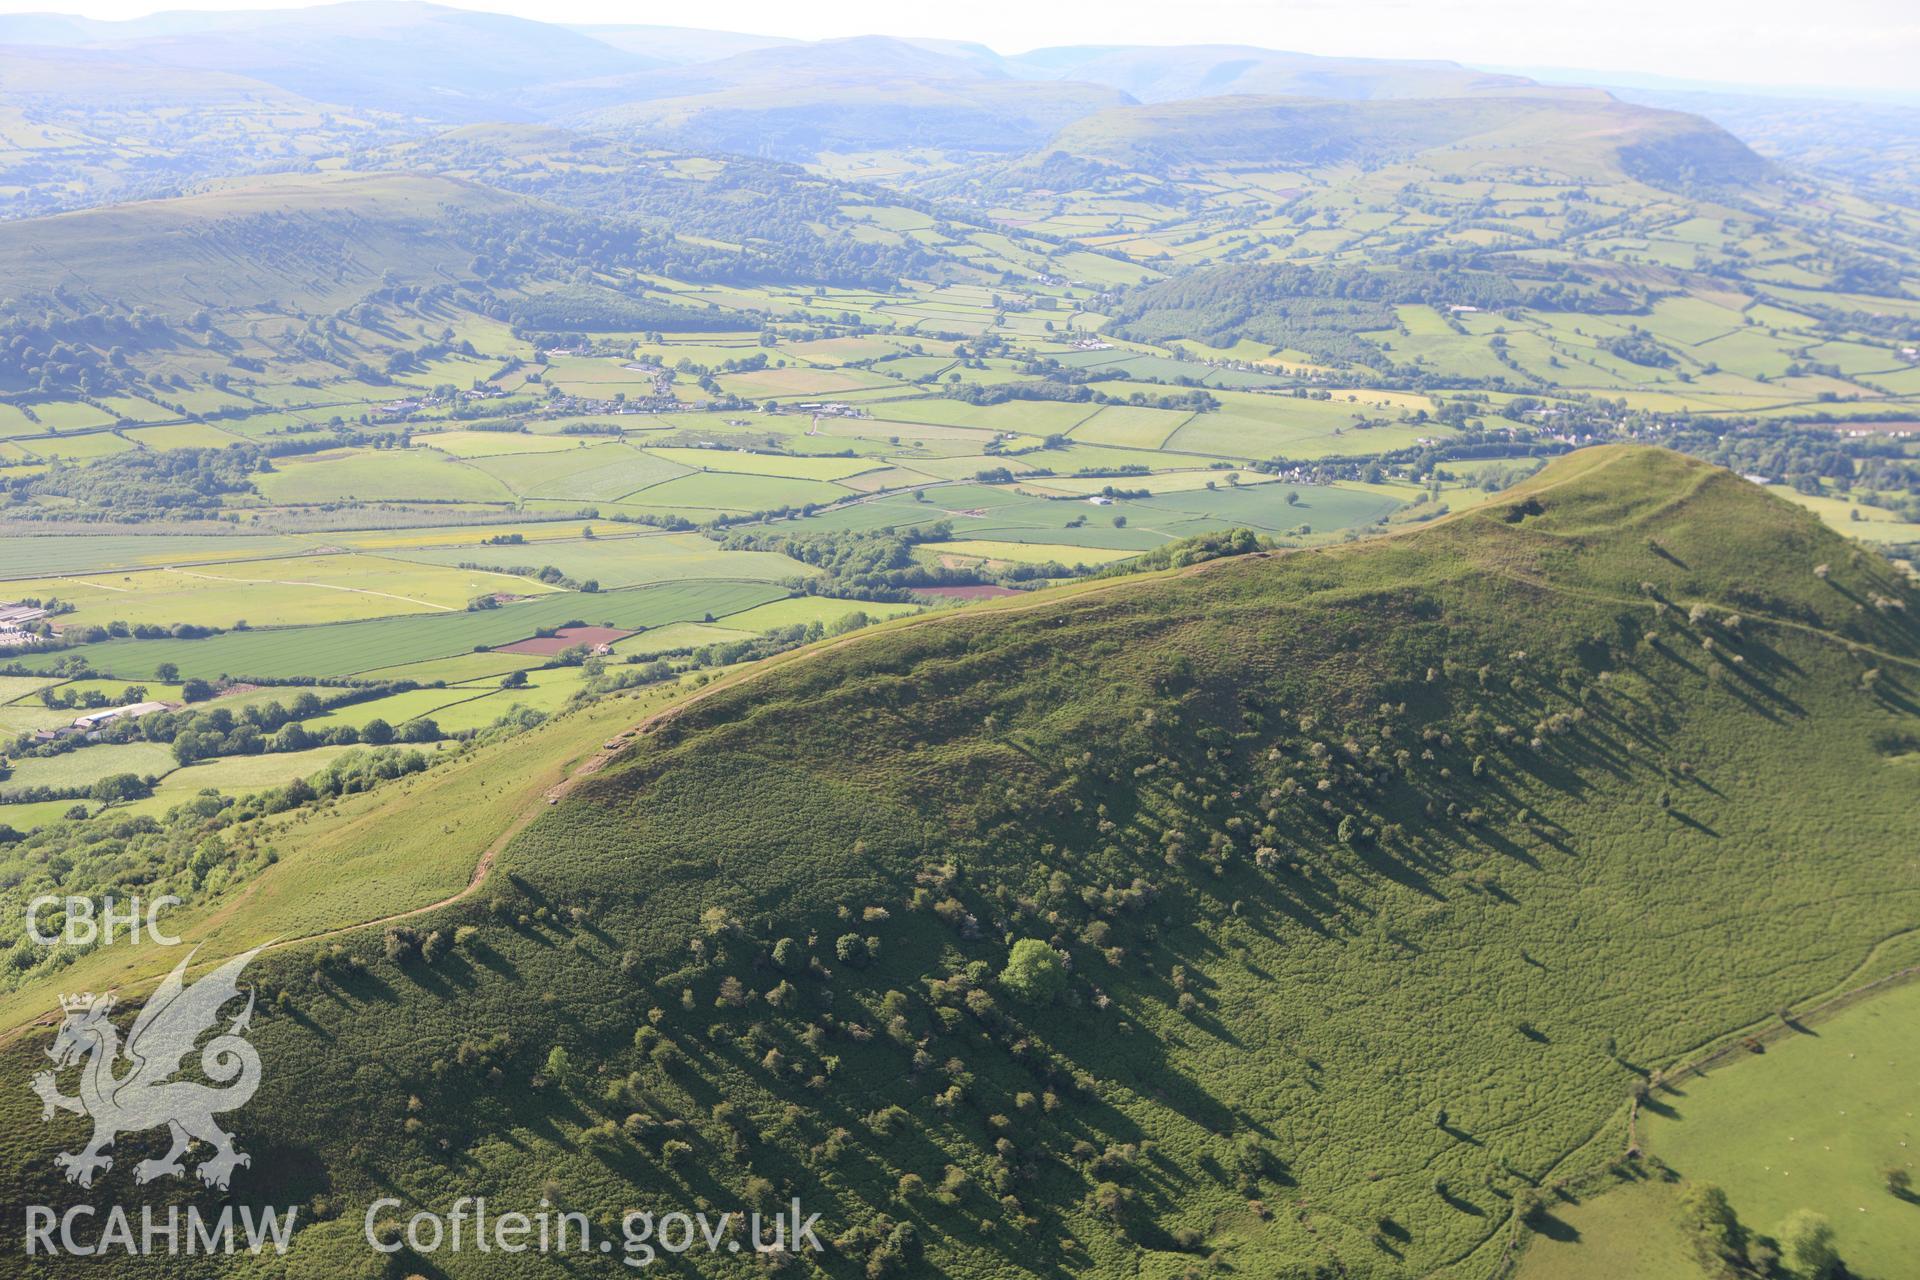 RCAHMW colour oblique aerial photograph of Skirrid Fawr Summit Enclosure. Taken on 11 June 2009 by Toby Driver